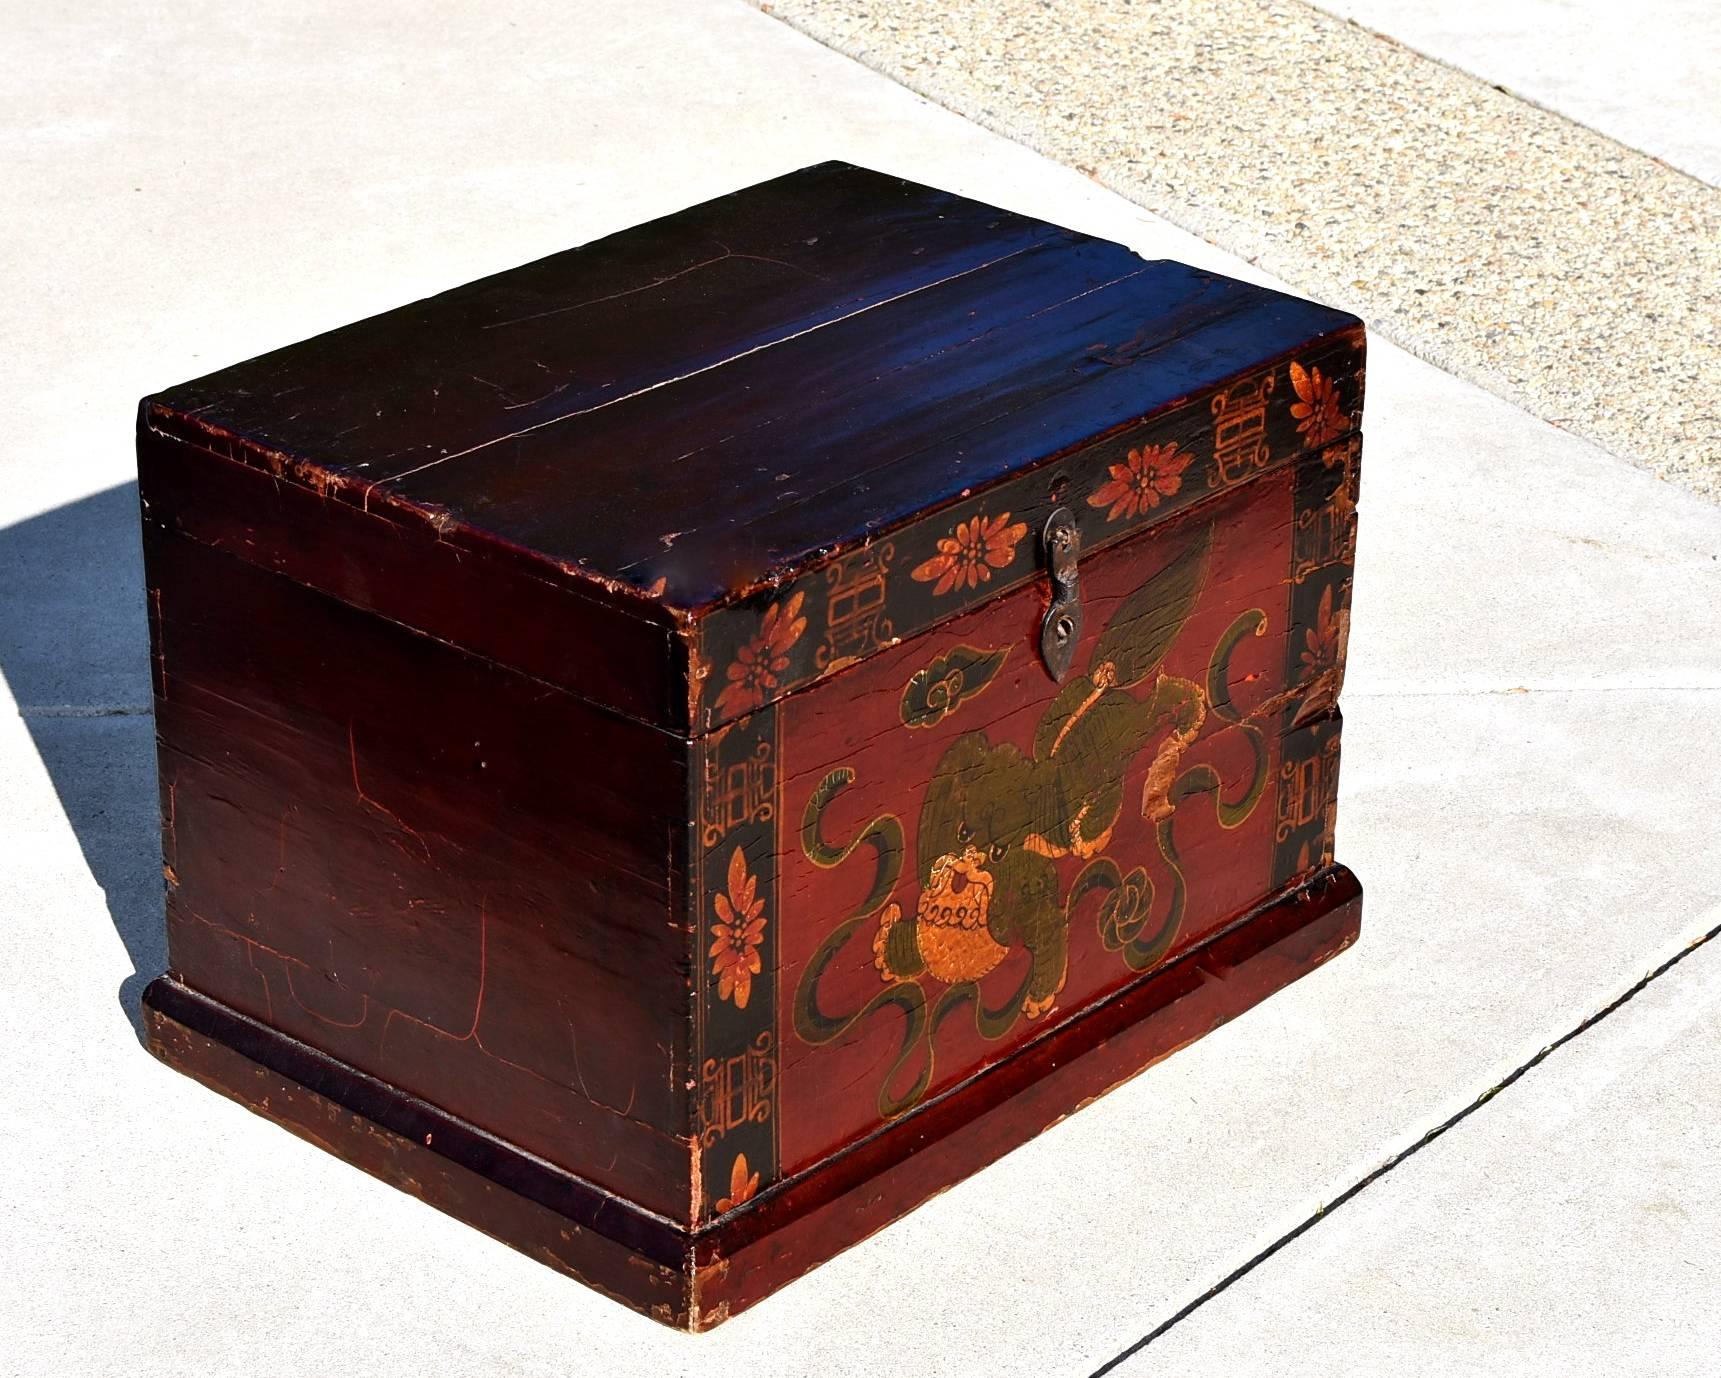 This is a special box that is hand-painted with the foo dog motif. The foo dog is playing with a ribbon sewn with a ball of silk flower. Box's front has exotic borders that are decorated with flowers and longevity symbols. Original hardware closes